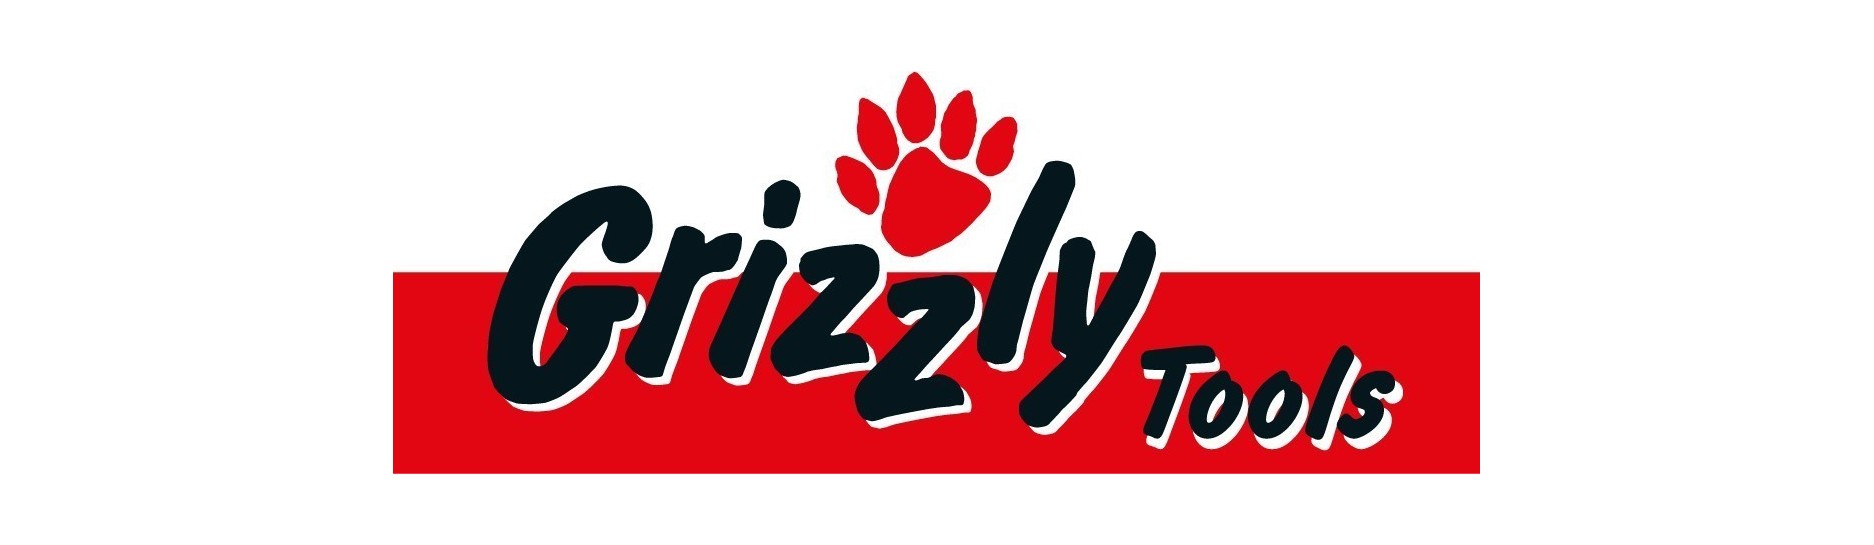 GRIZZLY TOOLS